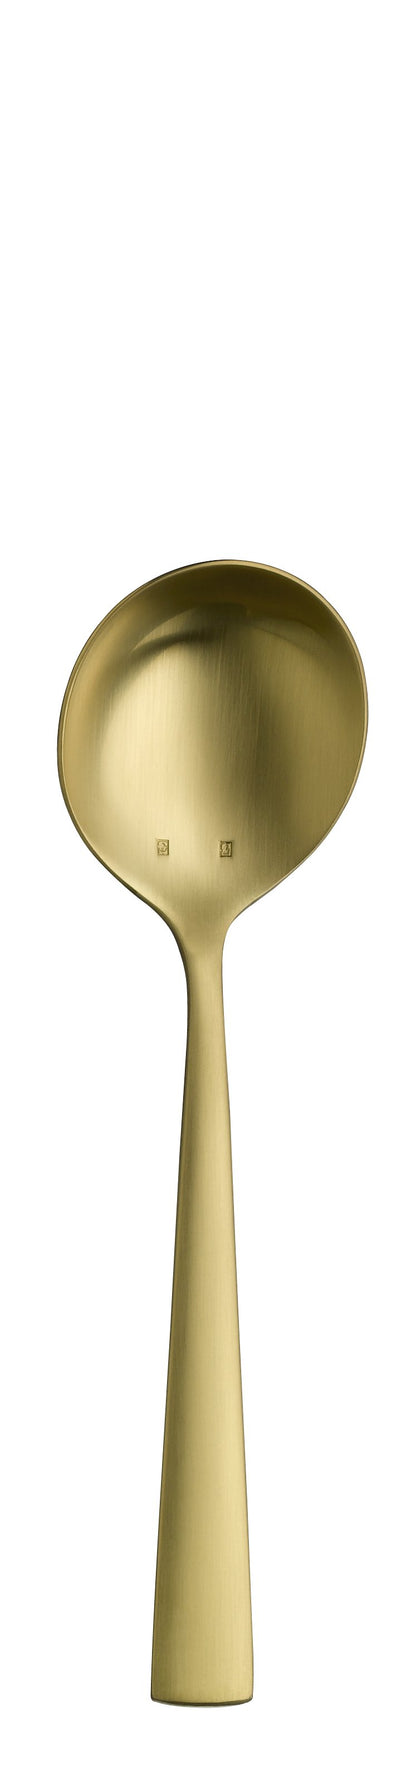 Round soup spoon ACCENT PVD gold brushed 176mm